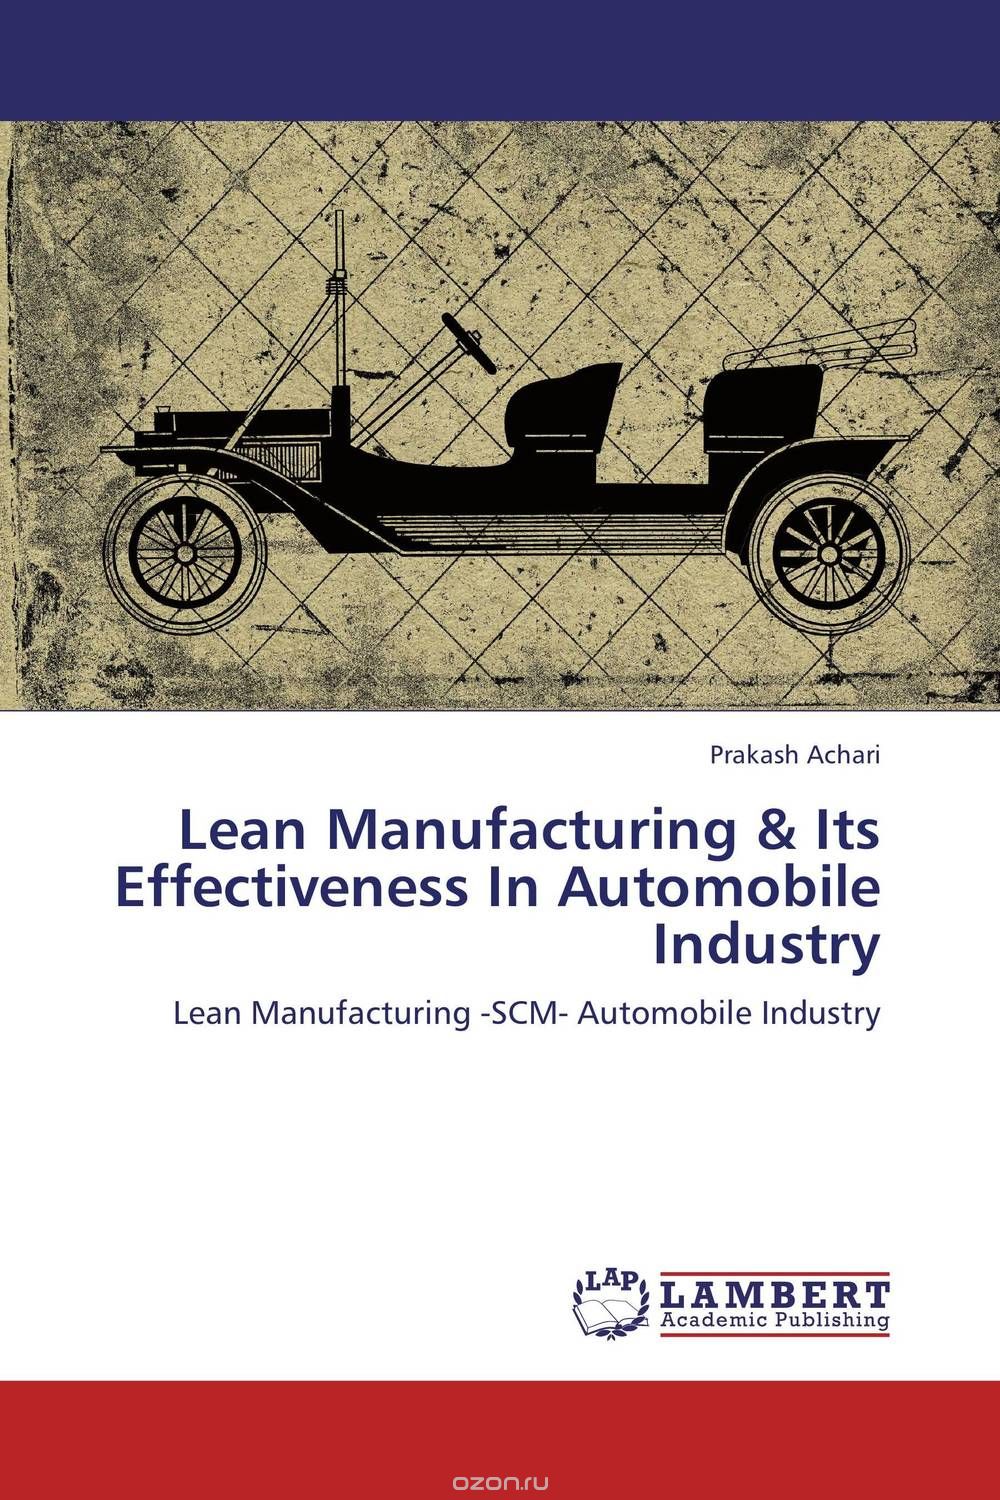 Lean Manufacturing & Its Effectiveness In Automobile Industry